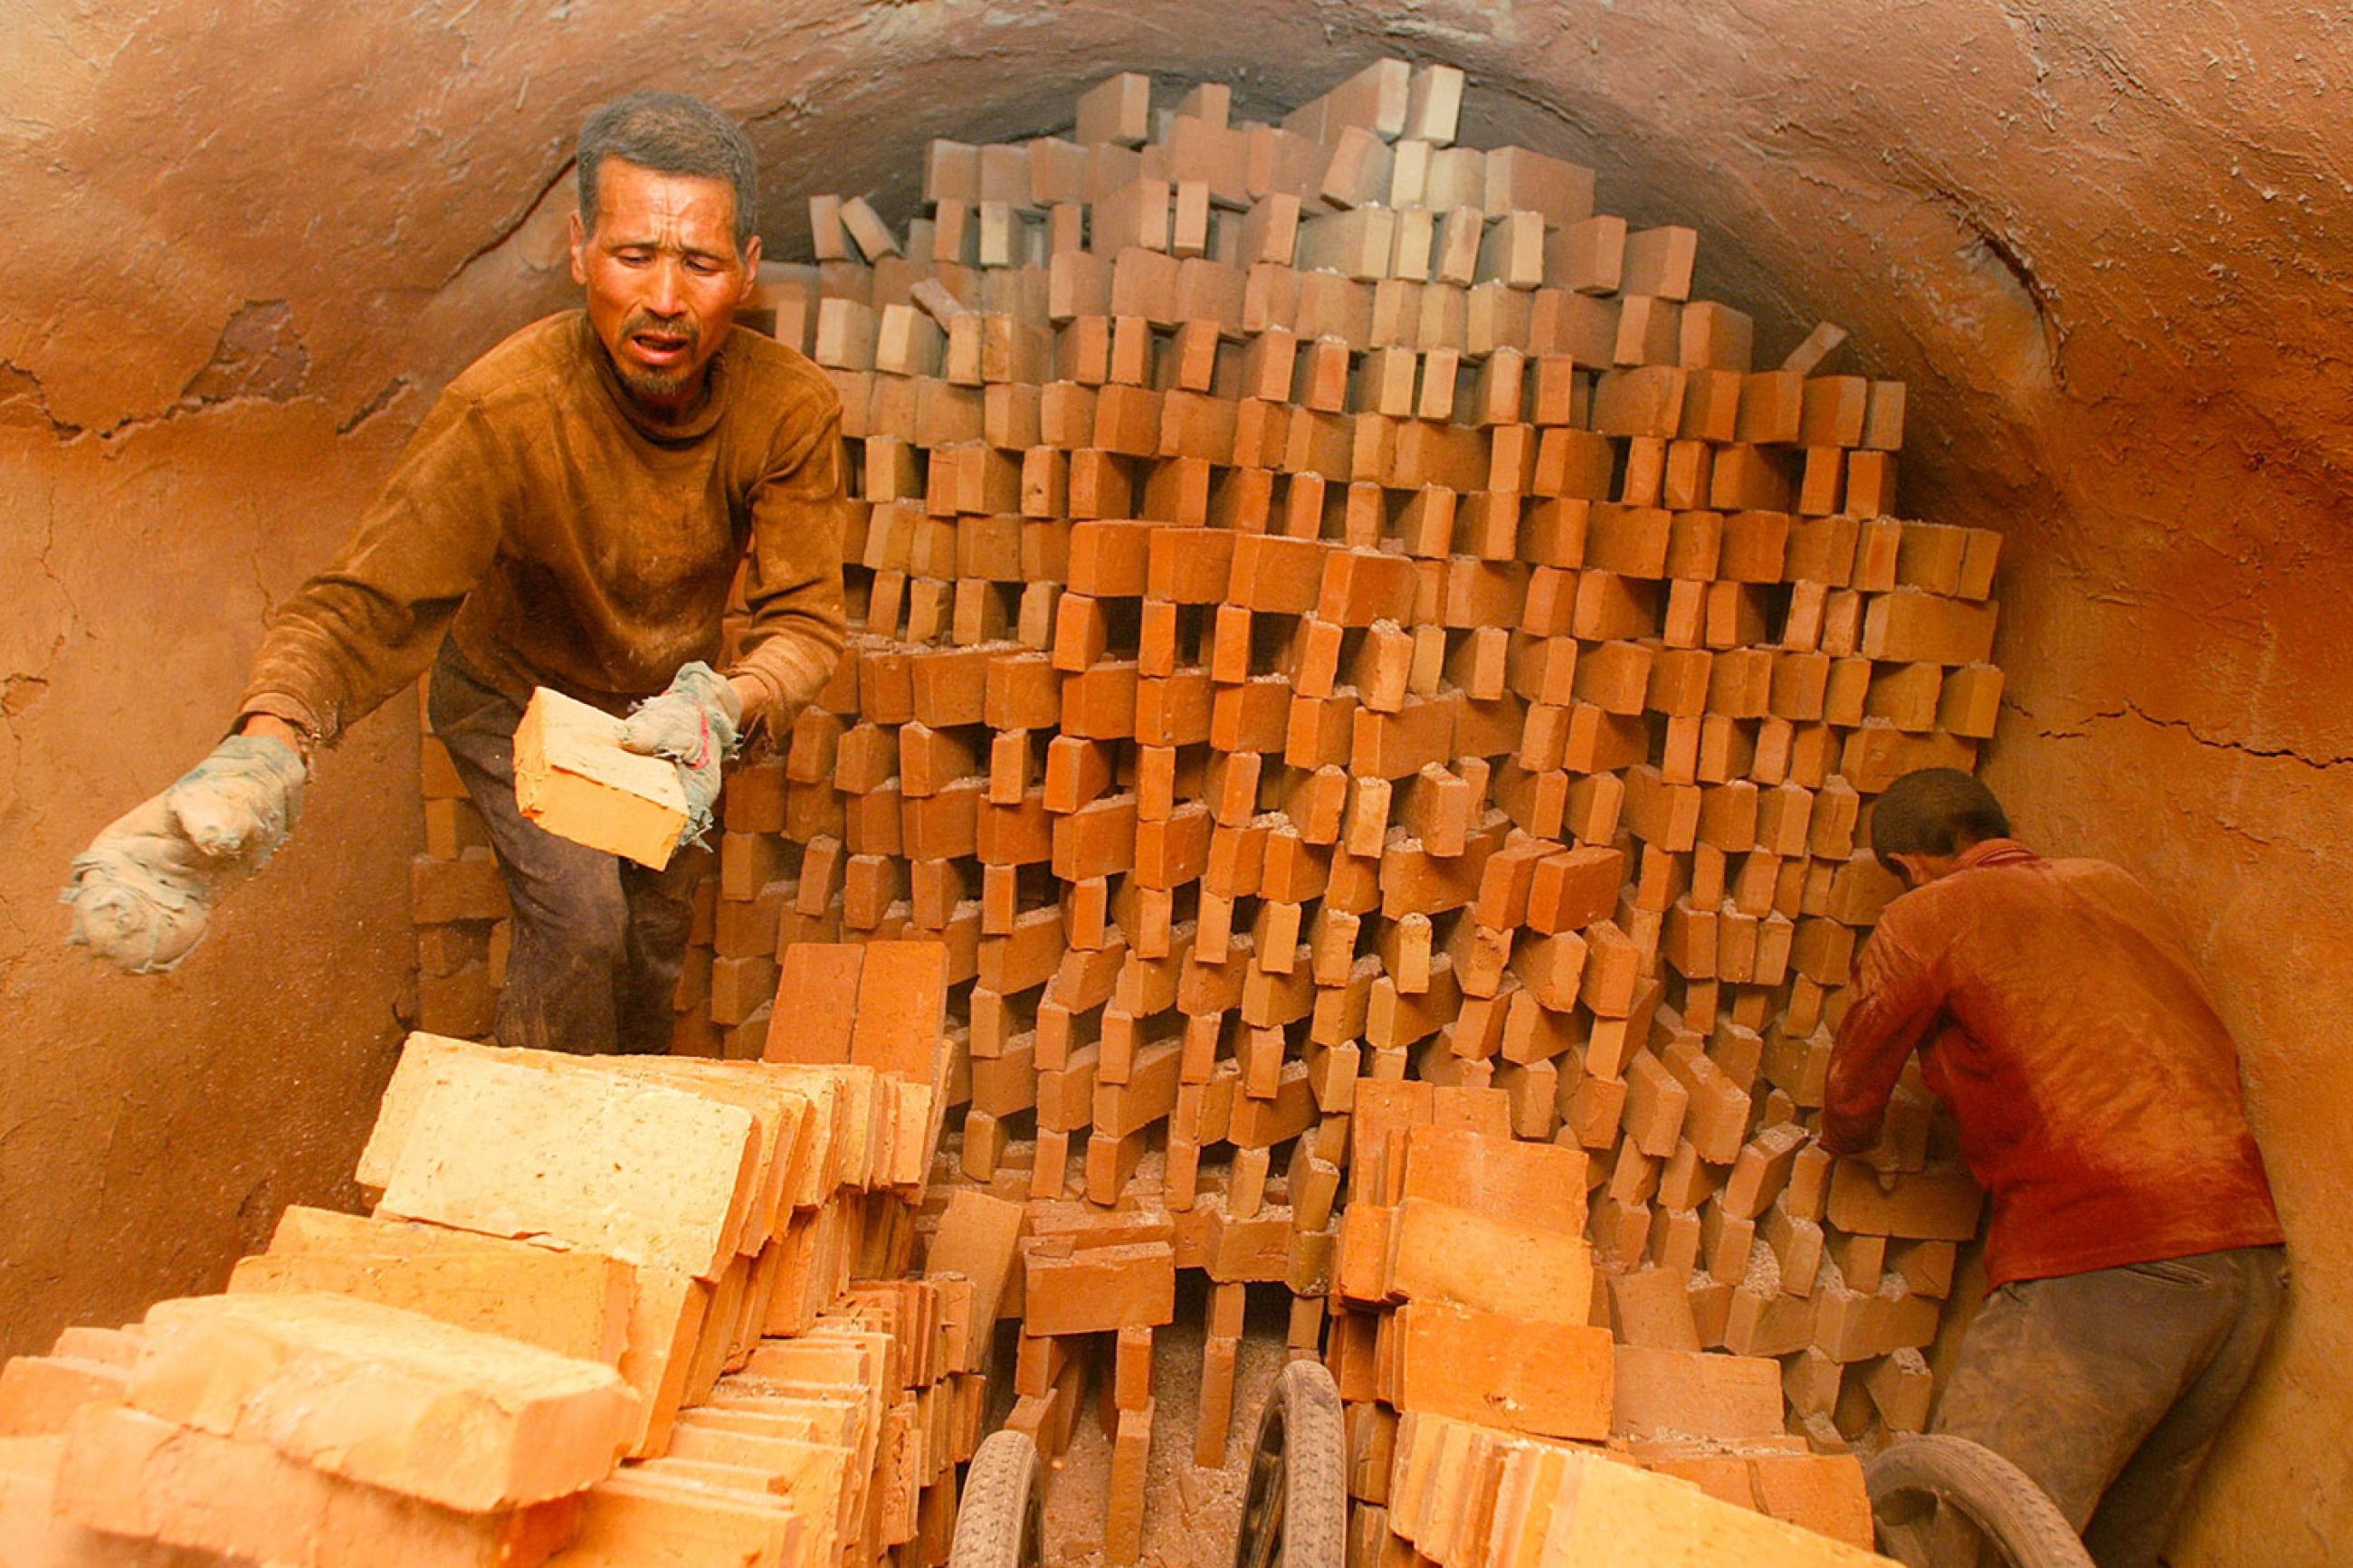 Chinese men work at a brick production plant in Xian, northwest of China's Shaanxi province on April 27, 2005. The photo shows a man pulling bricks off a stack where they were presumably kiln fired and placing them into a stack in the foreground. the overall color of the photo is brick red, suggesting that the dust is everywhere. 